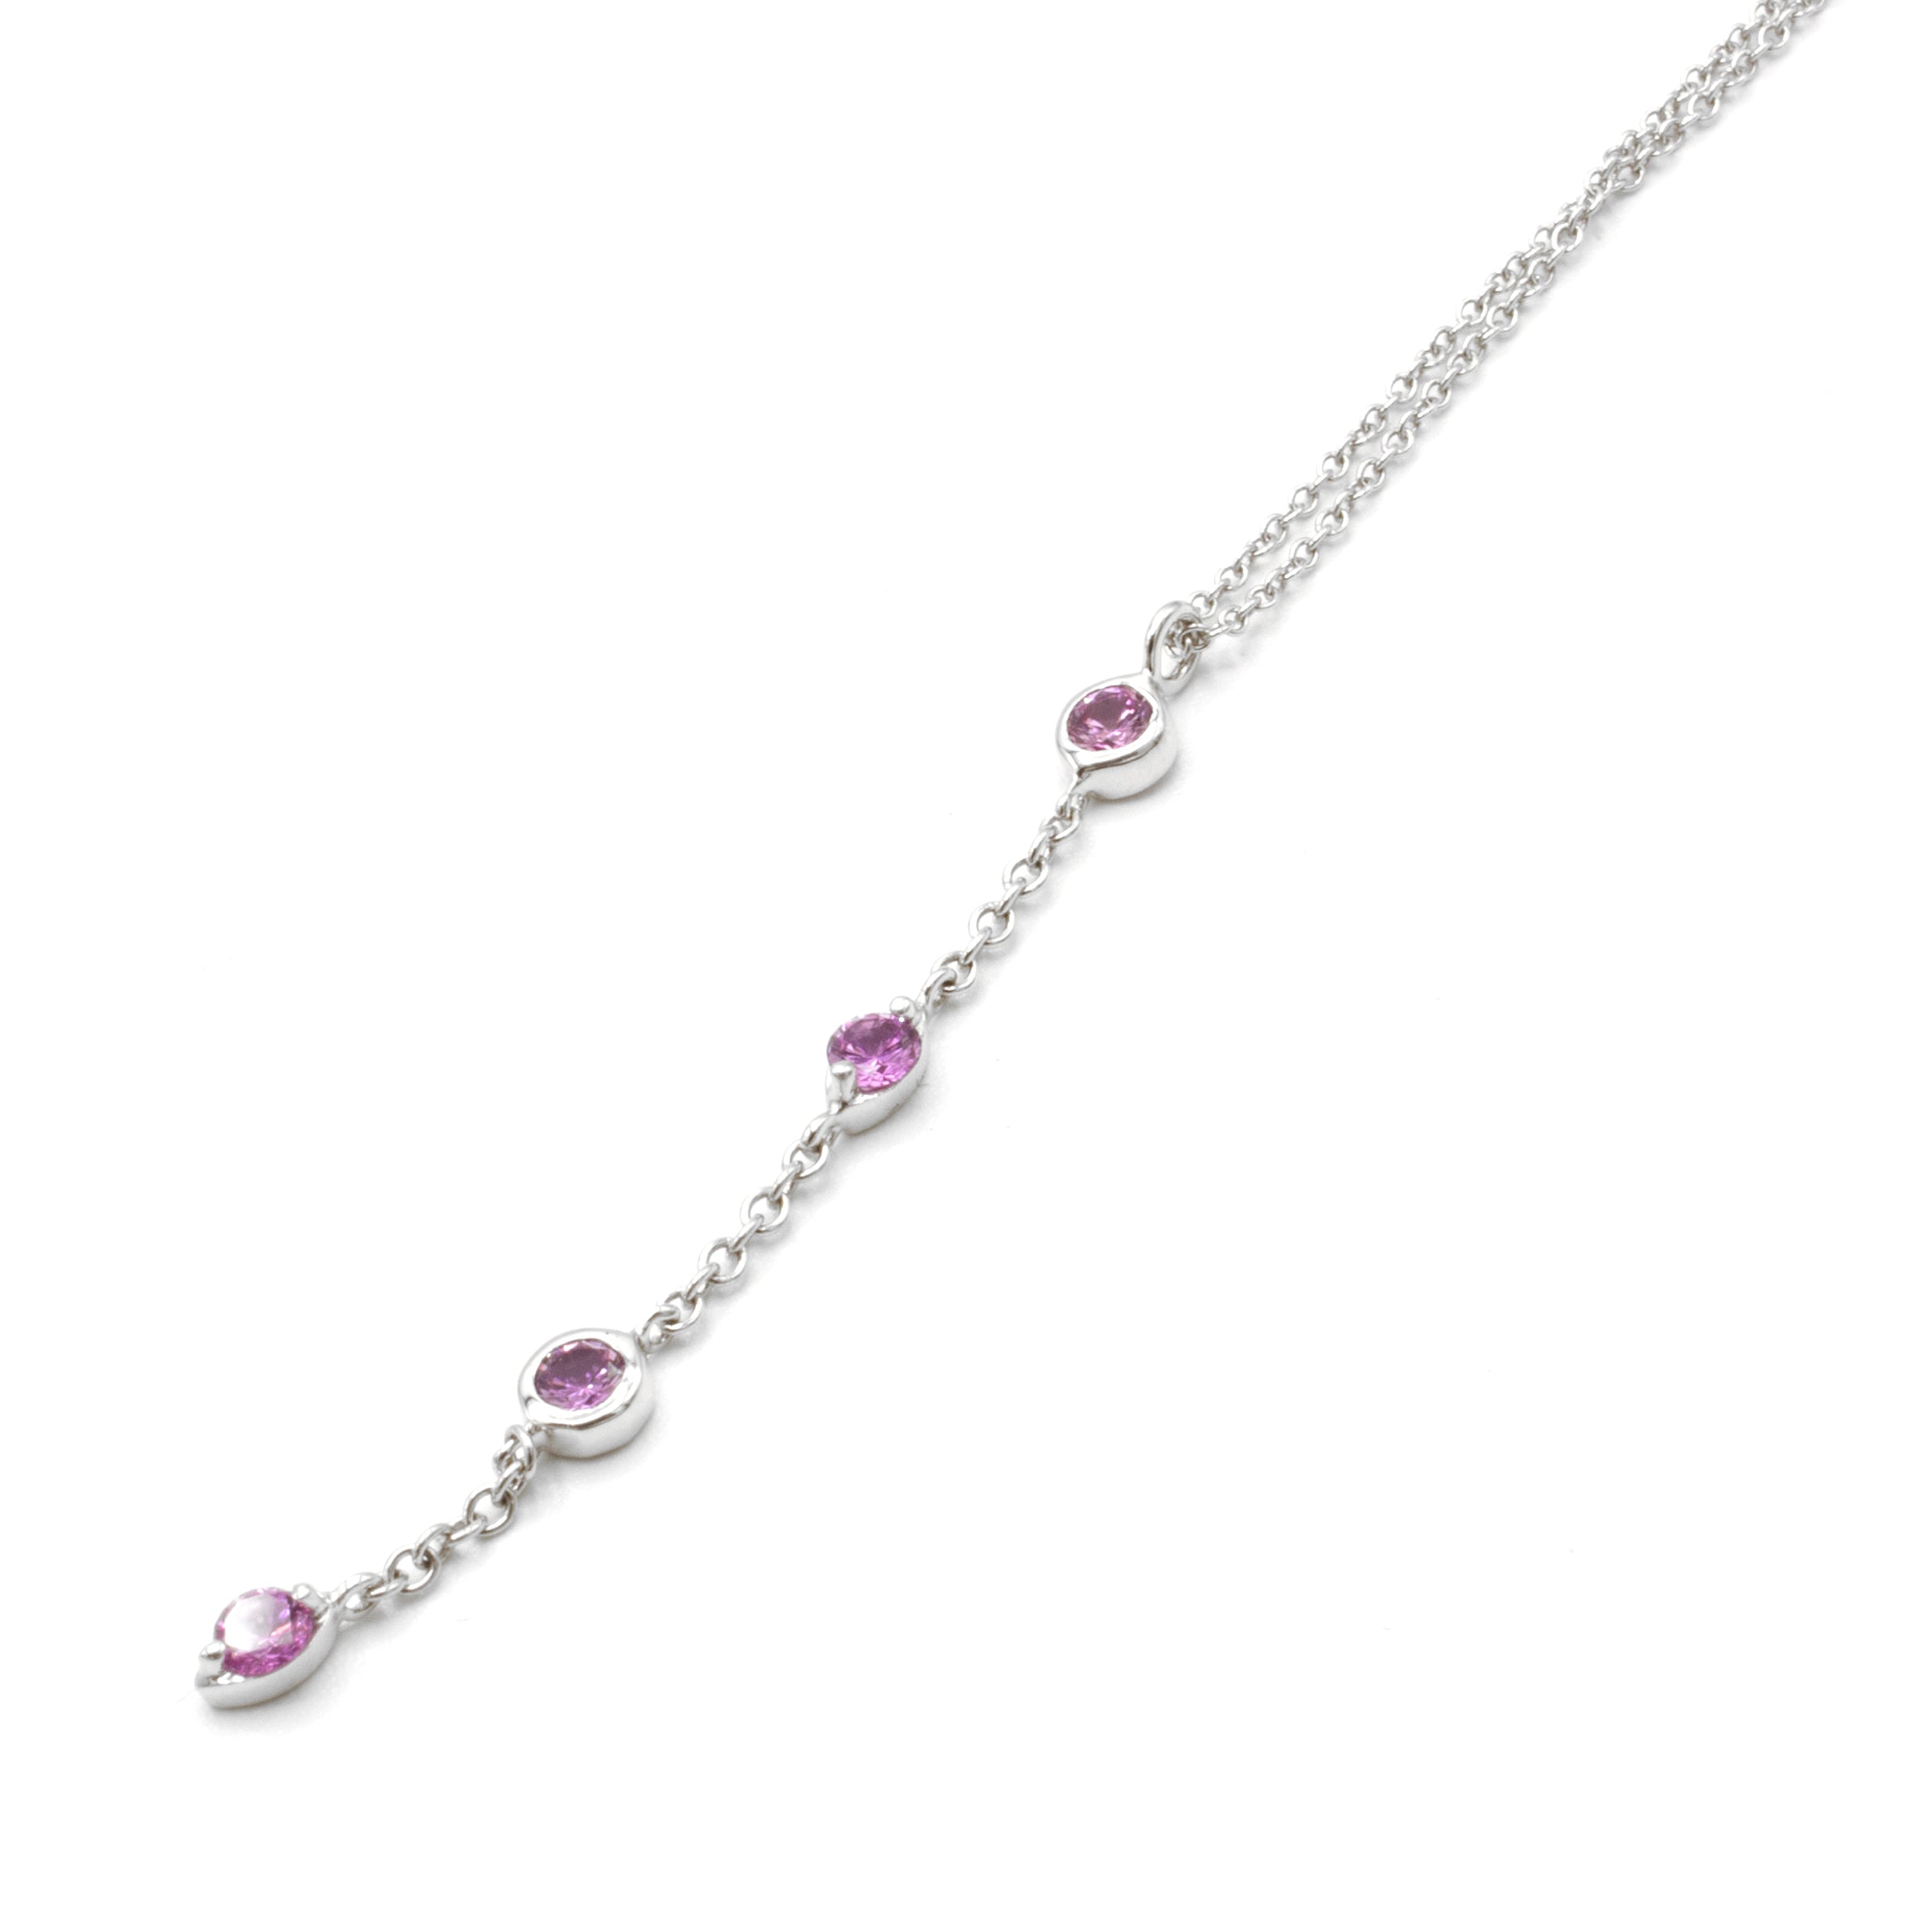 Excellent Tiffany & Co. Mini Heart Lock Pink Sapphire 18k White Gold  Necklace